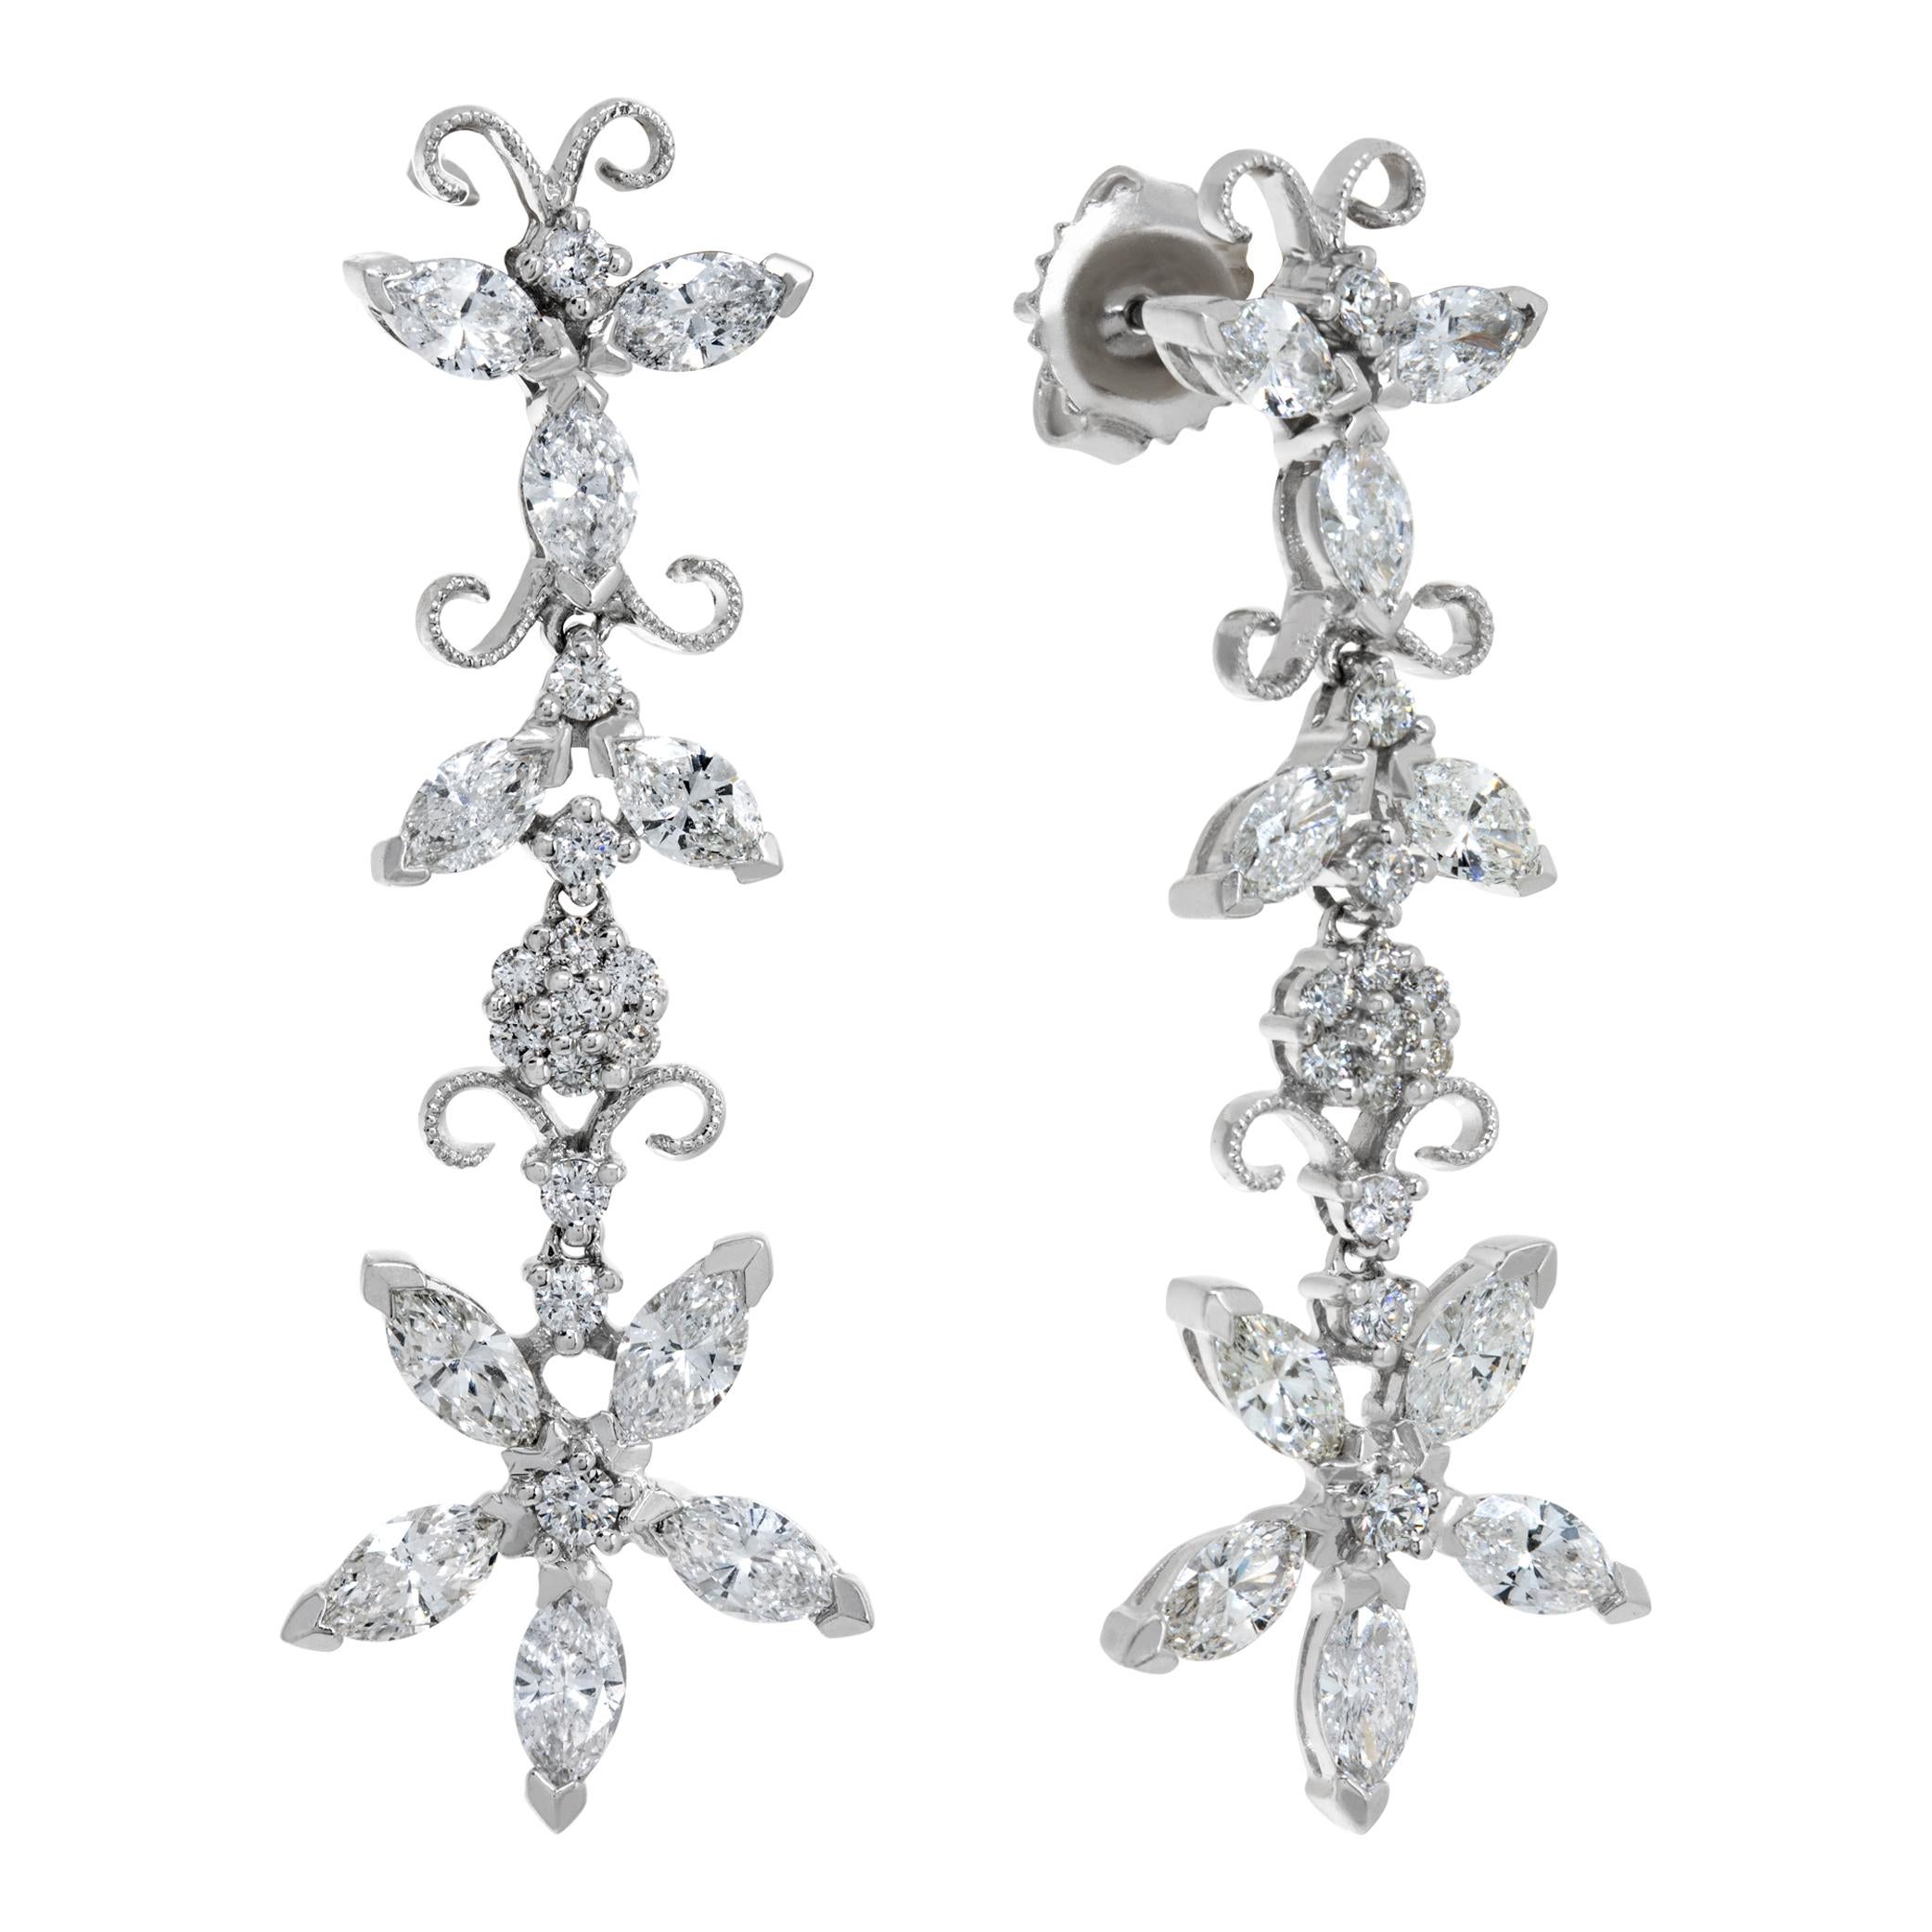 Flower design marquise & round diamond earrings in 14k white gold with 3.86 carats in marquise cut diamonds & 0.43 carat in round diamonds (H-I Color, SI Clarity). Hanging length 1.70 inches.